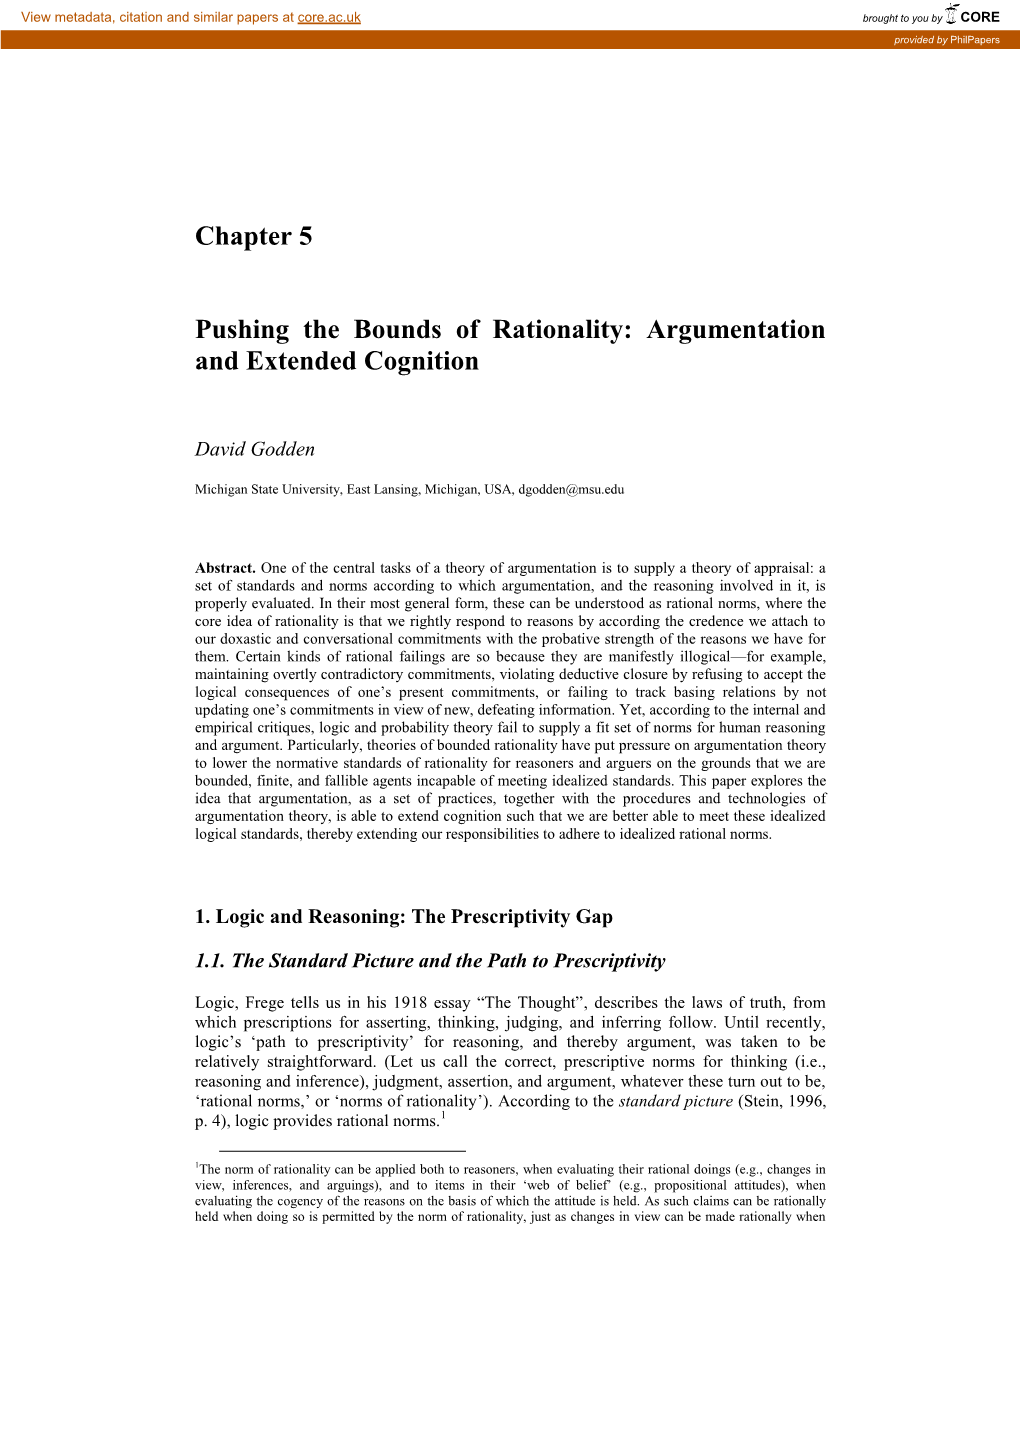 Chapter 5 Pushing the Bounds of Rationality: Argumentation And